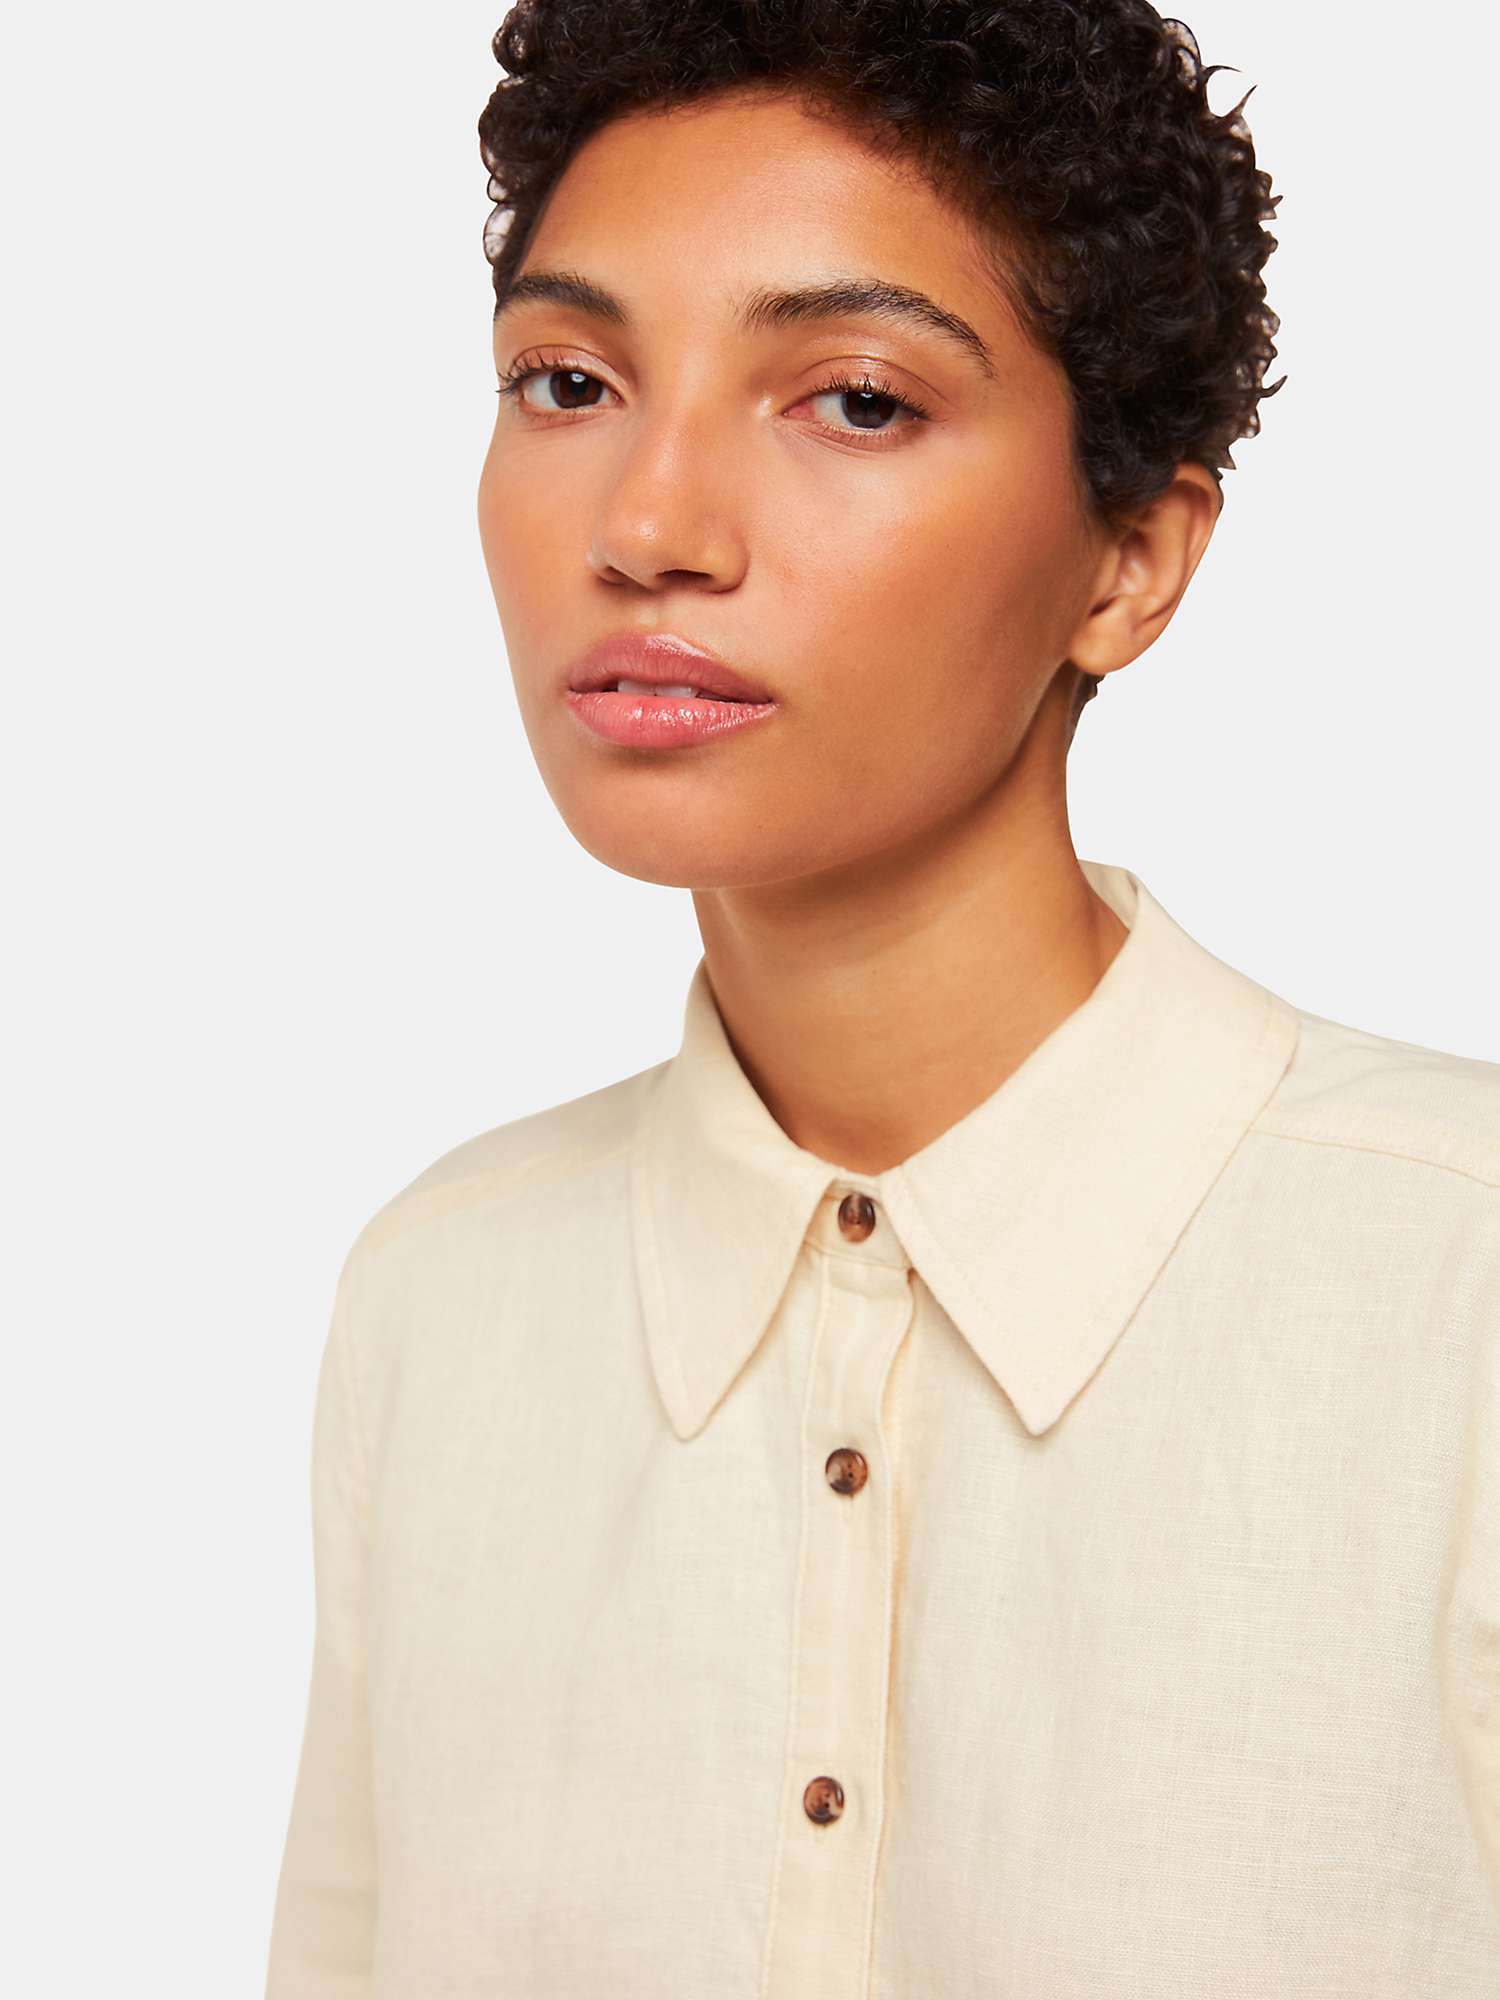 Buy Whistles Relaxed Fit Linen Shirt, Ivory Online at johnlewis.com